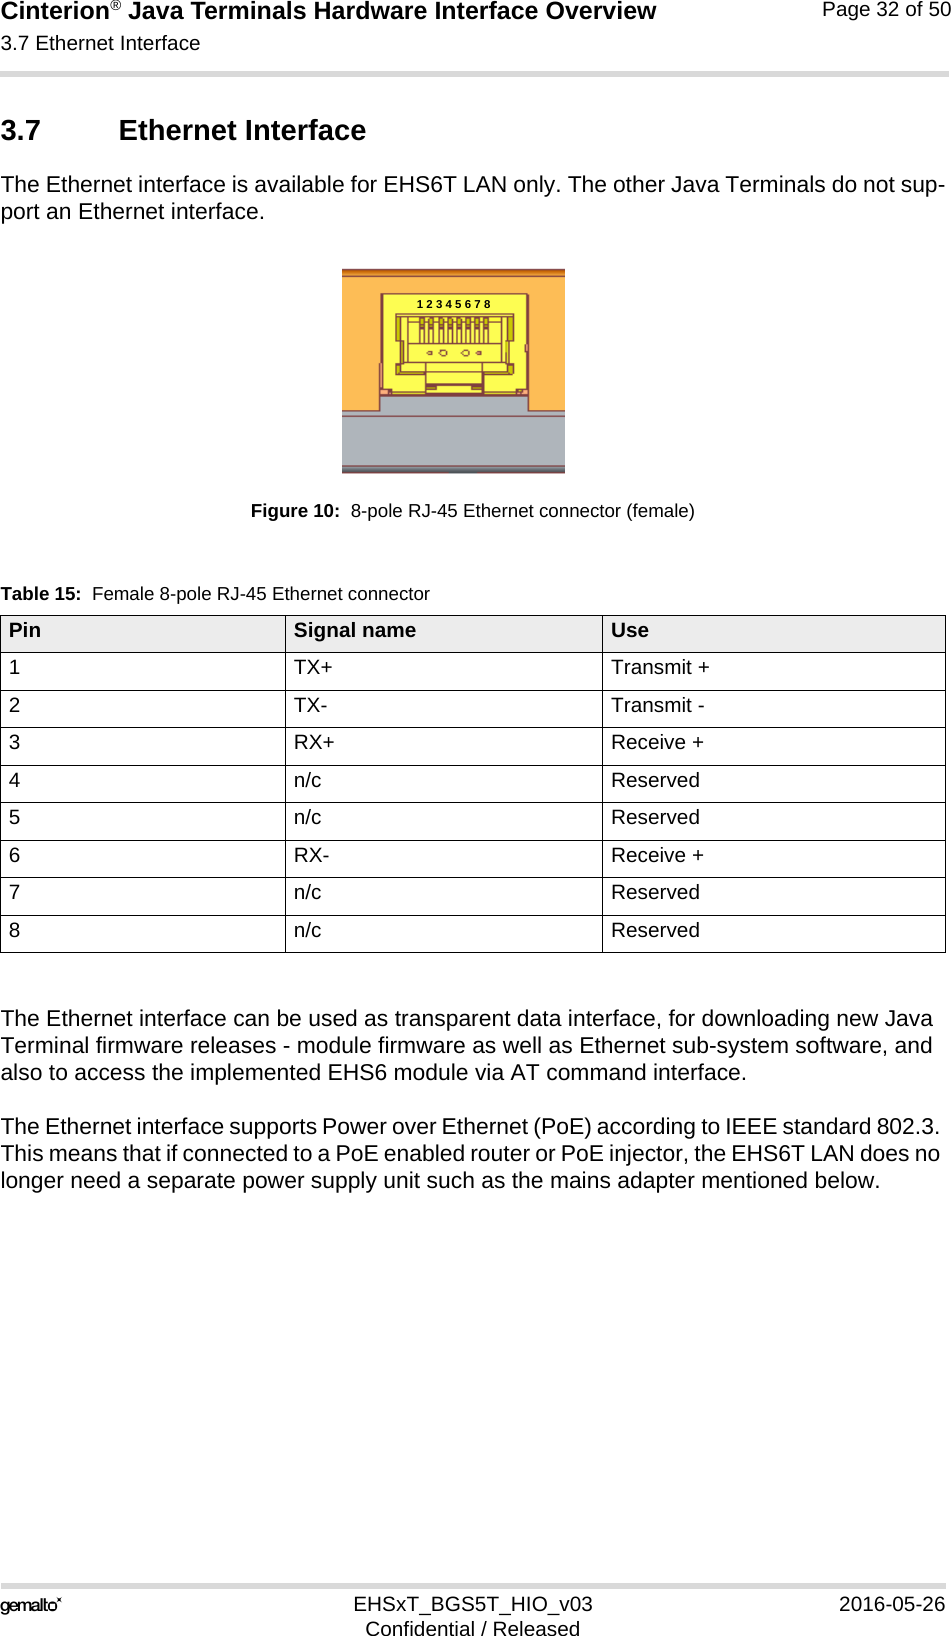 Cinterion® Java Terminals Hardware Interface Overview3.7 Ethernet Interface39EHSxT_BGS5T_HIO_v03 2016-05-26Confidential / ReleasedPage 32 of 503.7 Ethernet InterfaceThe Ethernet interface is available for EHS6T LAN only. The other Java Terminals do not sup-port an Ethernet interface.Figure 10:  8-pole RJ-45 Ethernet connector (female)The Ethernet interface can be used as transparent data interface, for downloading new Java Terminal firmware releases - module firmware as well as Ethernet sub-system software, and also to access the implemented EHS6 module via AT command interface.The Ethernet interface supports Power over Ethernet (PoE) according to IEEE standard 802.3. This means that if connected to a PoE enabled router or PoE injector, the EHS6T LAN does no longer need a separate power supply unit such as the mains adapter mentioned below.Table 15:  Female 8-pole RJ-45 Ethernet connectorPin Signal name Use1TX+ Transmit +2TX- Transmit -3 RX+ Receive +4n/c Reserved5n/c Reserved6 RX- Receive +7n/c Reserved8n/c Reserved1 2 3 4 5 6 7 8